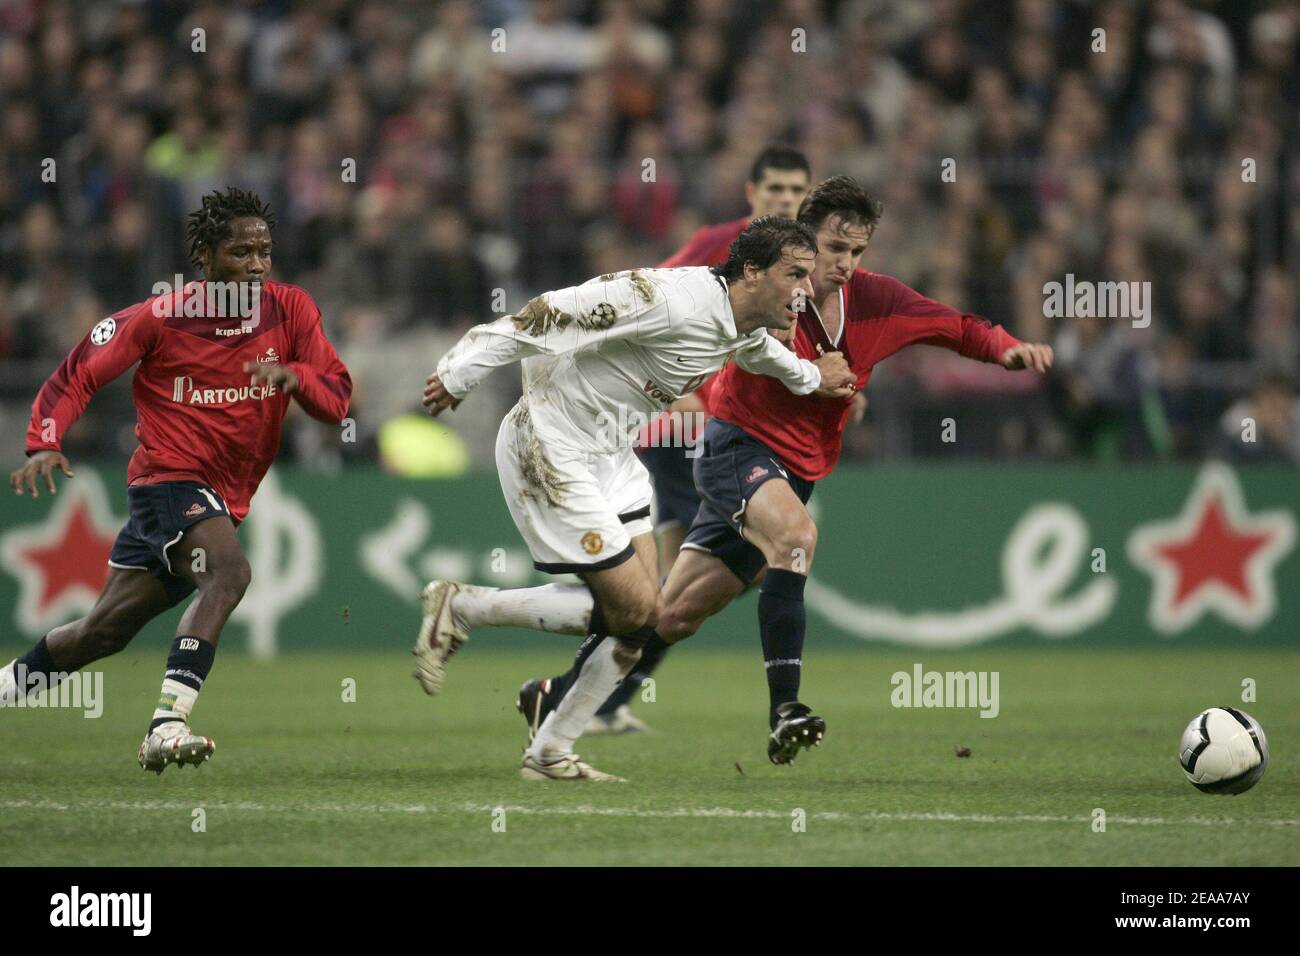 Manchester's Ruud Van Nistelrooy clears the ball under pressure from Lille's Jean Makoun(l) and Rafael (r) during the UEFA Champions League, Lille vs Manchester, in Saint-Denis near Paris, France, on November 2, 2005. Lille won 1-0. Photo by Laurent Zabulon/ABACAPRESS.COM Stock Photo